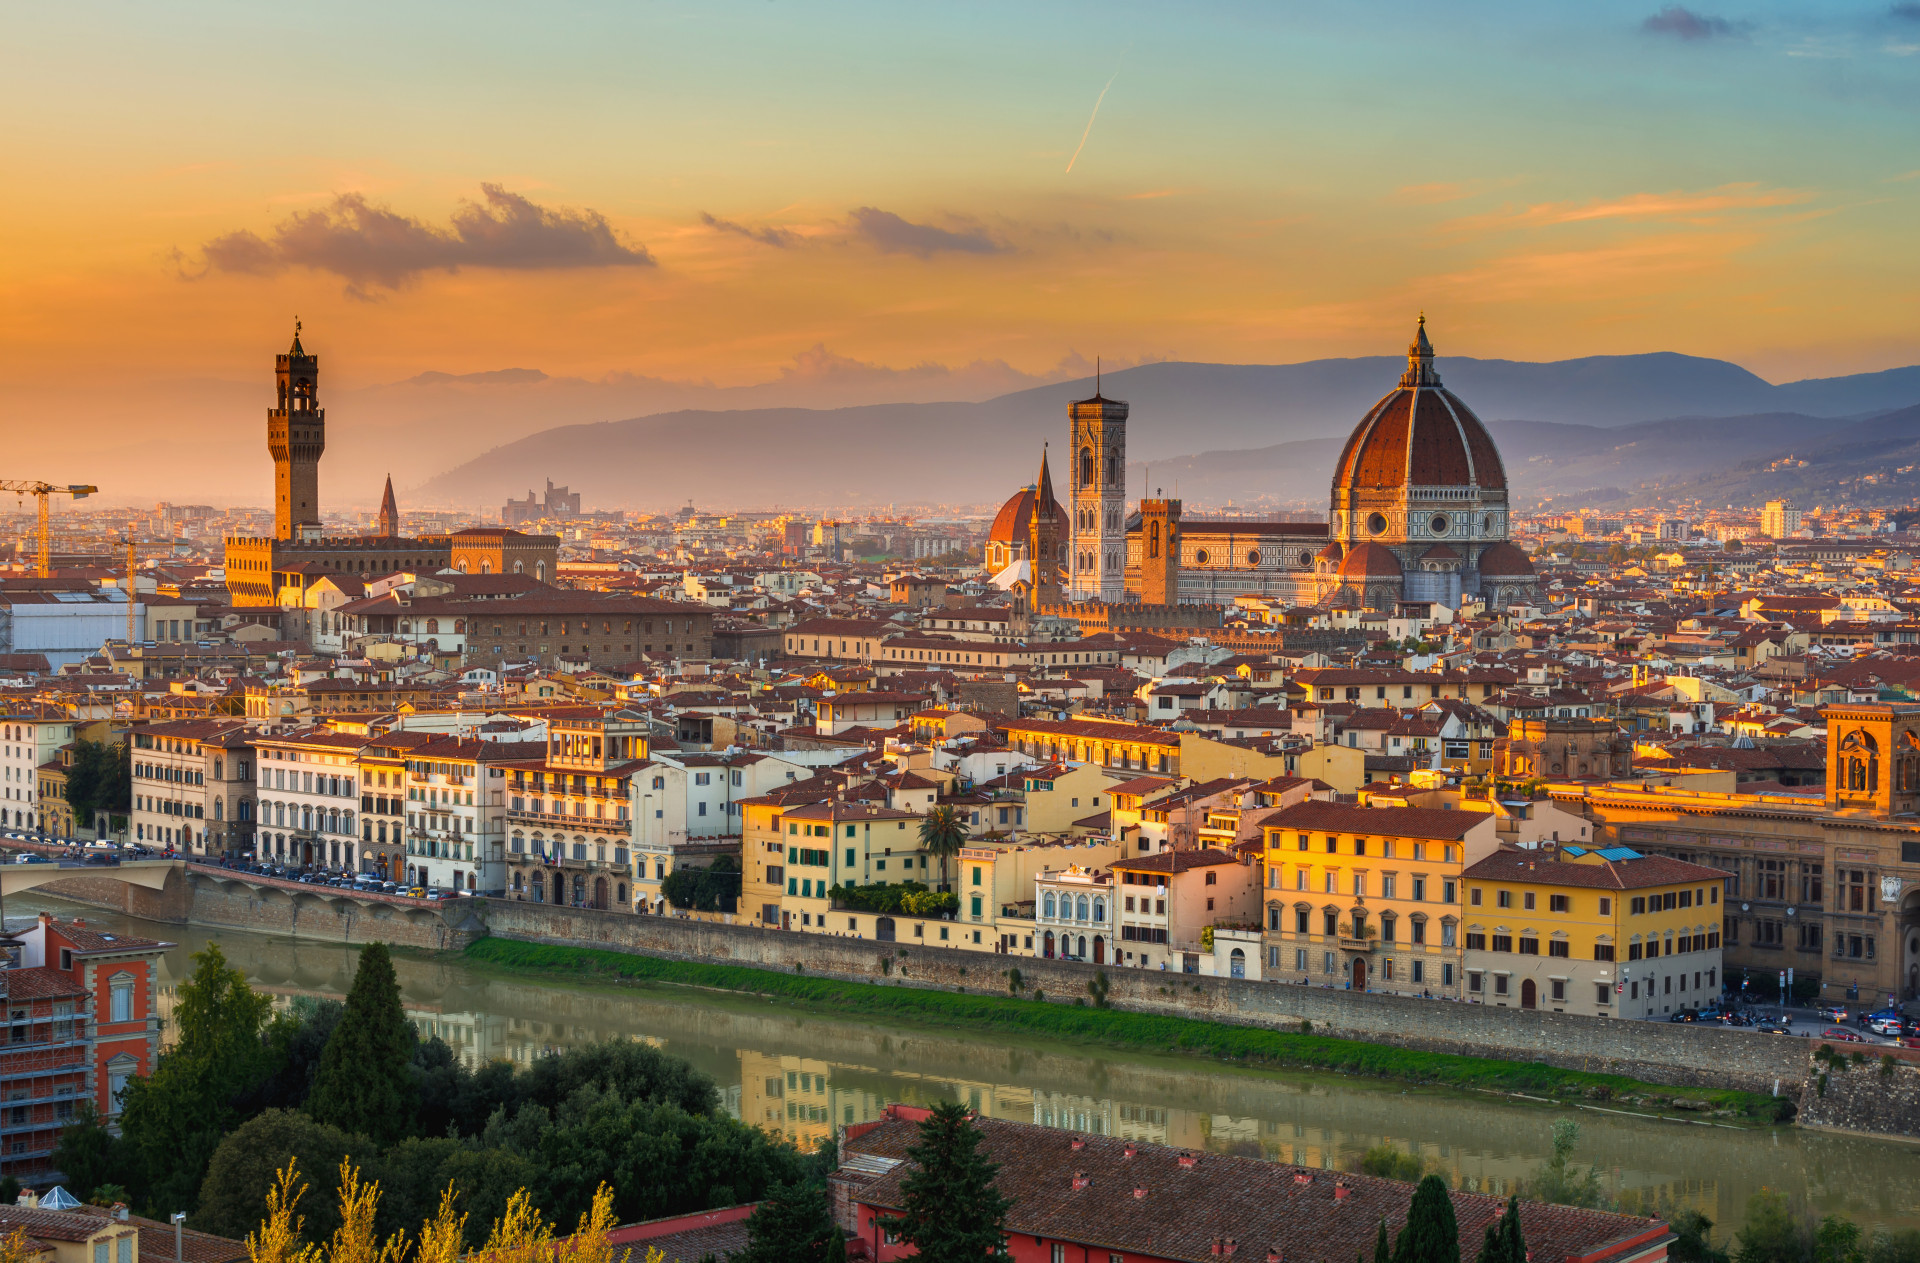 More and more tourists are choosing to visit Florence. Even if it's just for a day, it's worth visiting this city as it is comparable to an open air museum, and is perfect to discover on foot.<p><a href="https://www.msn.com/en-sg/community/channel/vid-7xx8mnucu55yw63we9va2gwr7uihbxwc68fxqp25x6tg4ftibpra?cvid=94631541bc0f4f89bfd59158d696ad7e">Follow us and access great exclusive content every day</a></p>